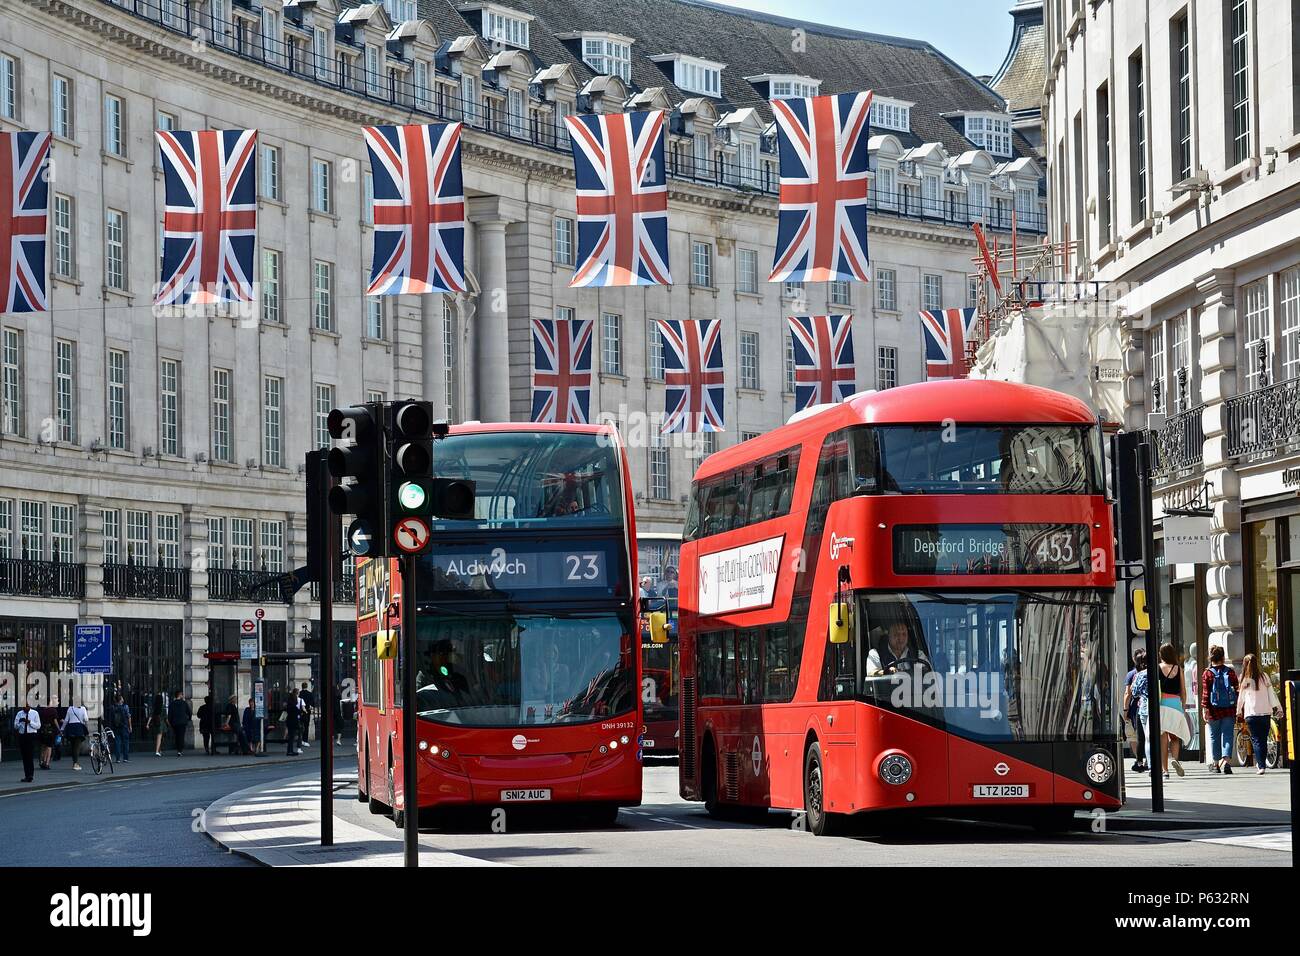 United Kingdom union flags above the Piccadilly area of London, City of Westminster, UK during the wedding of Prince Harry and Meghan Markle. Stock Photo